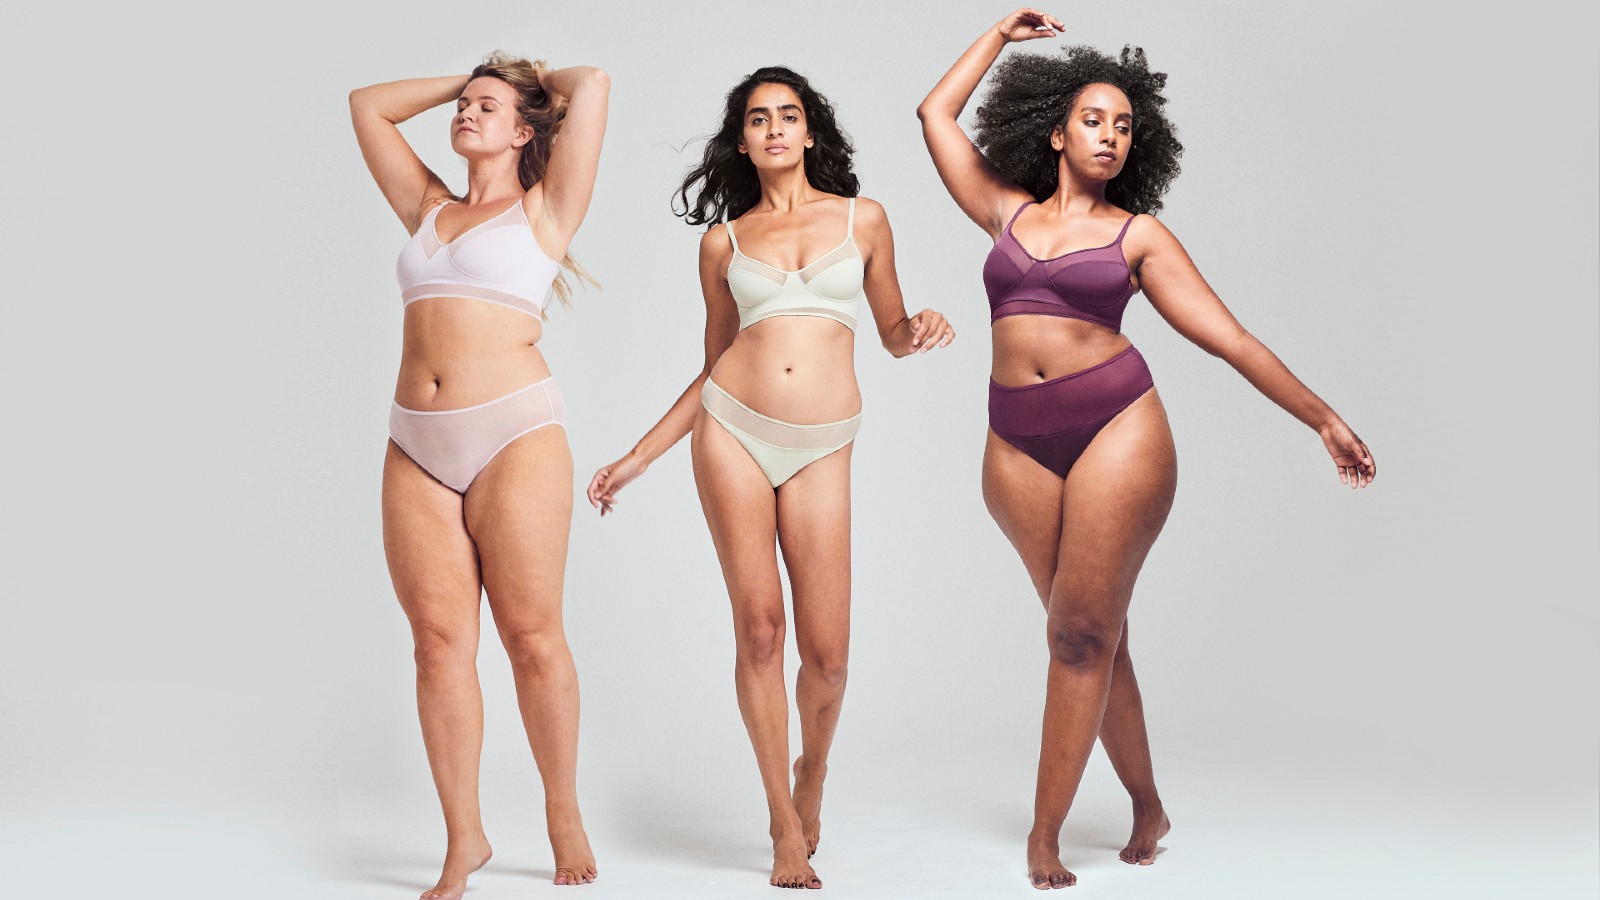 Is Shapewear Going out of Style? Spanx Tries On 'Feminist' Slogan